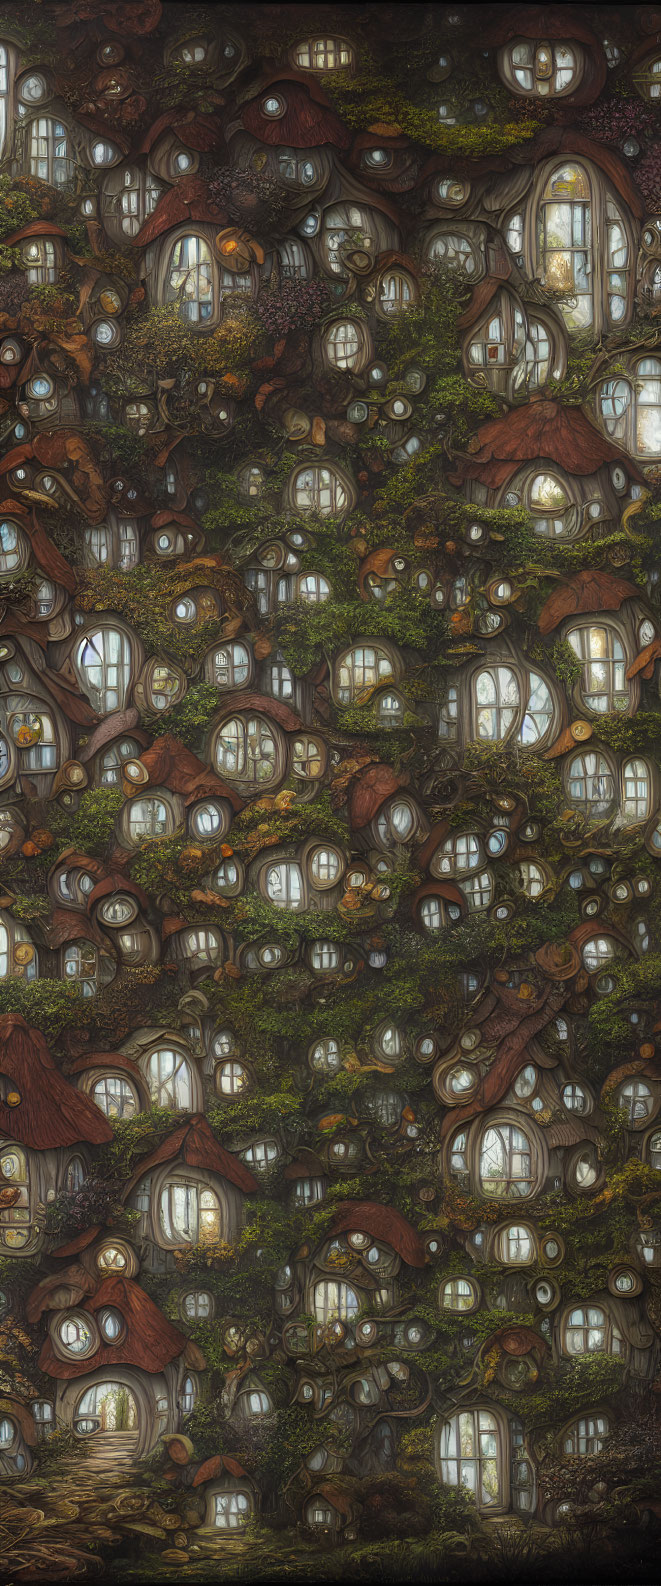 Whimsical Fantasy Forest Scene with Tree Houses and Round Windows